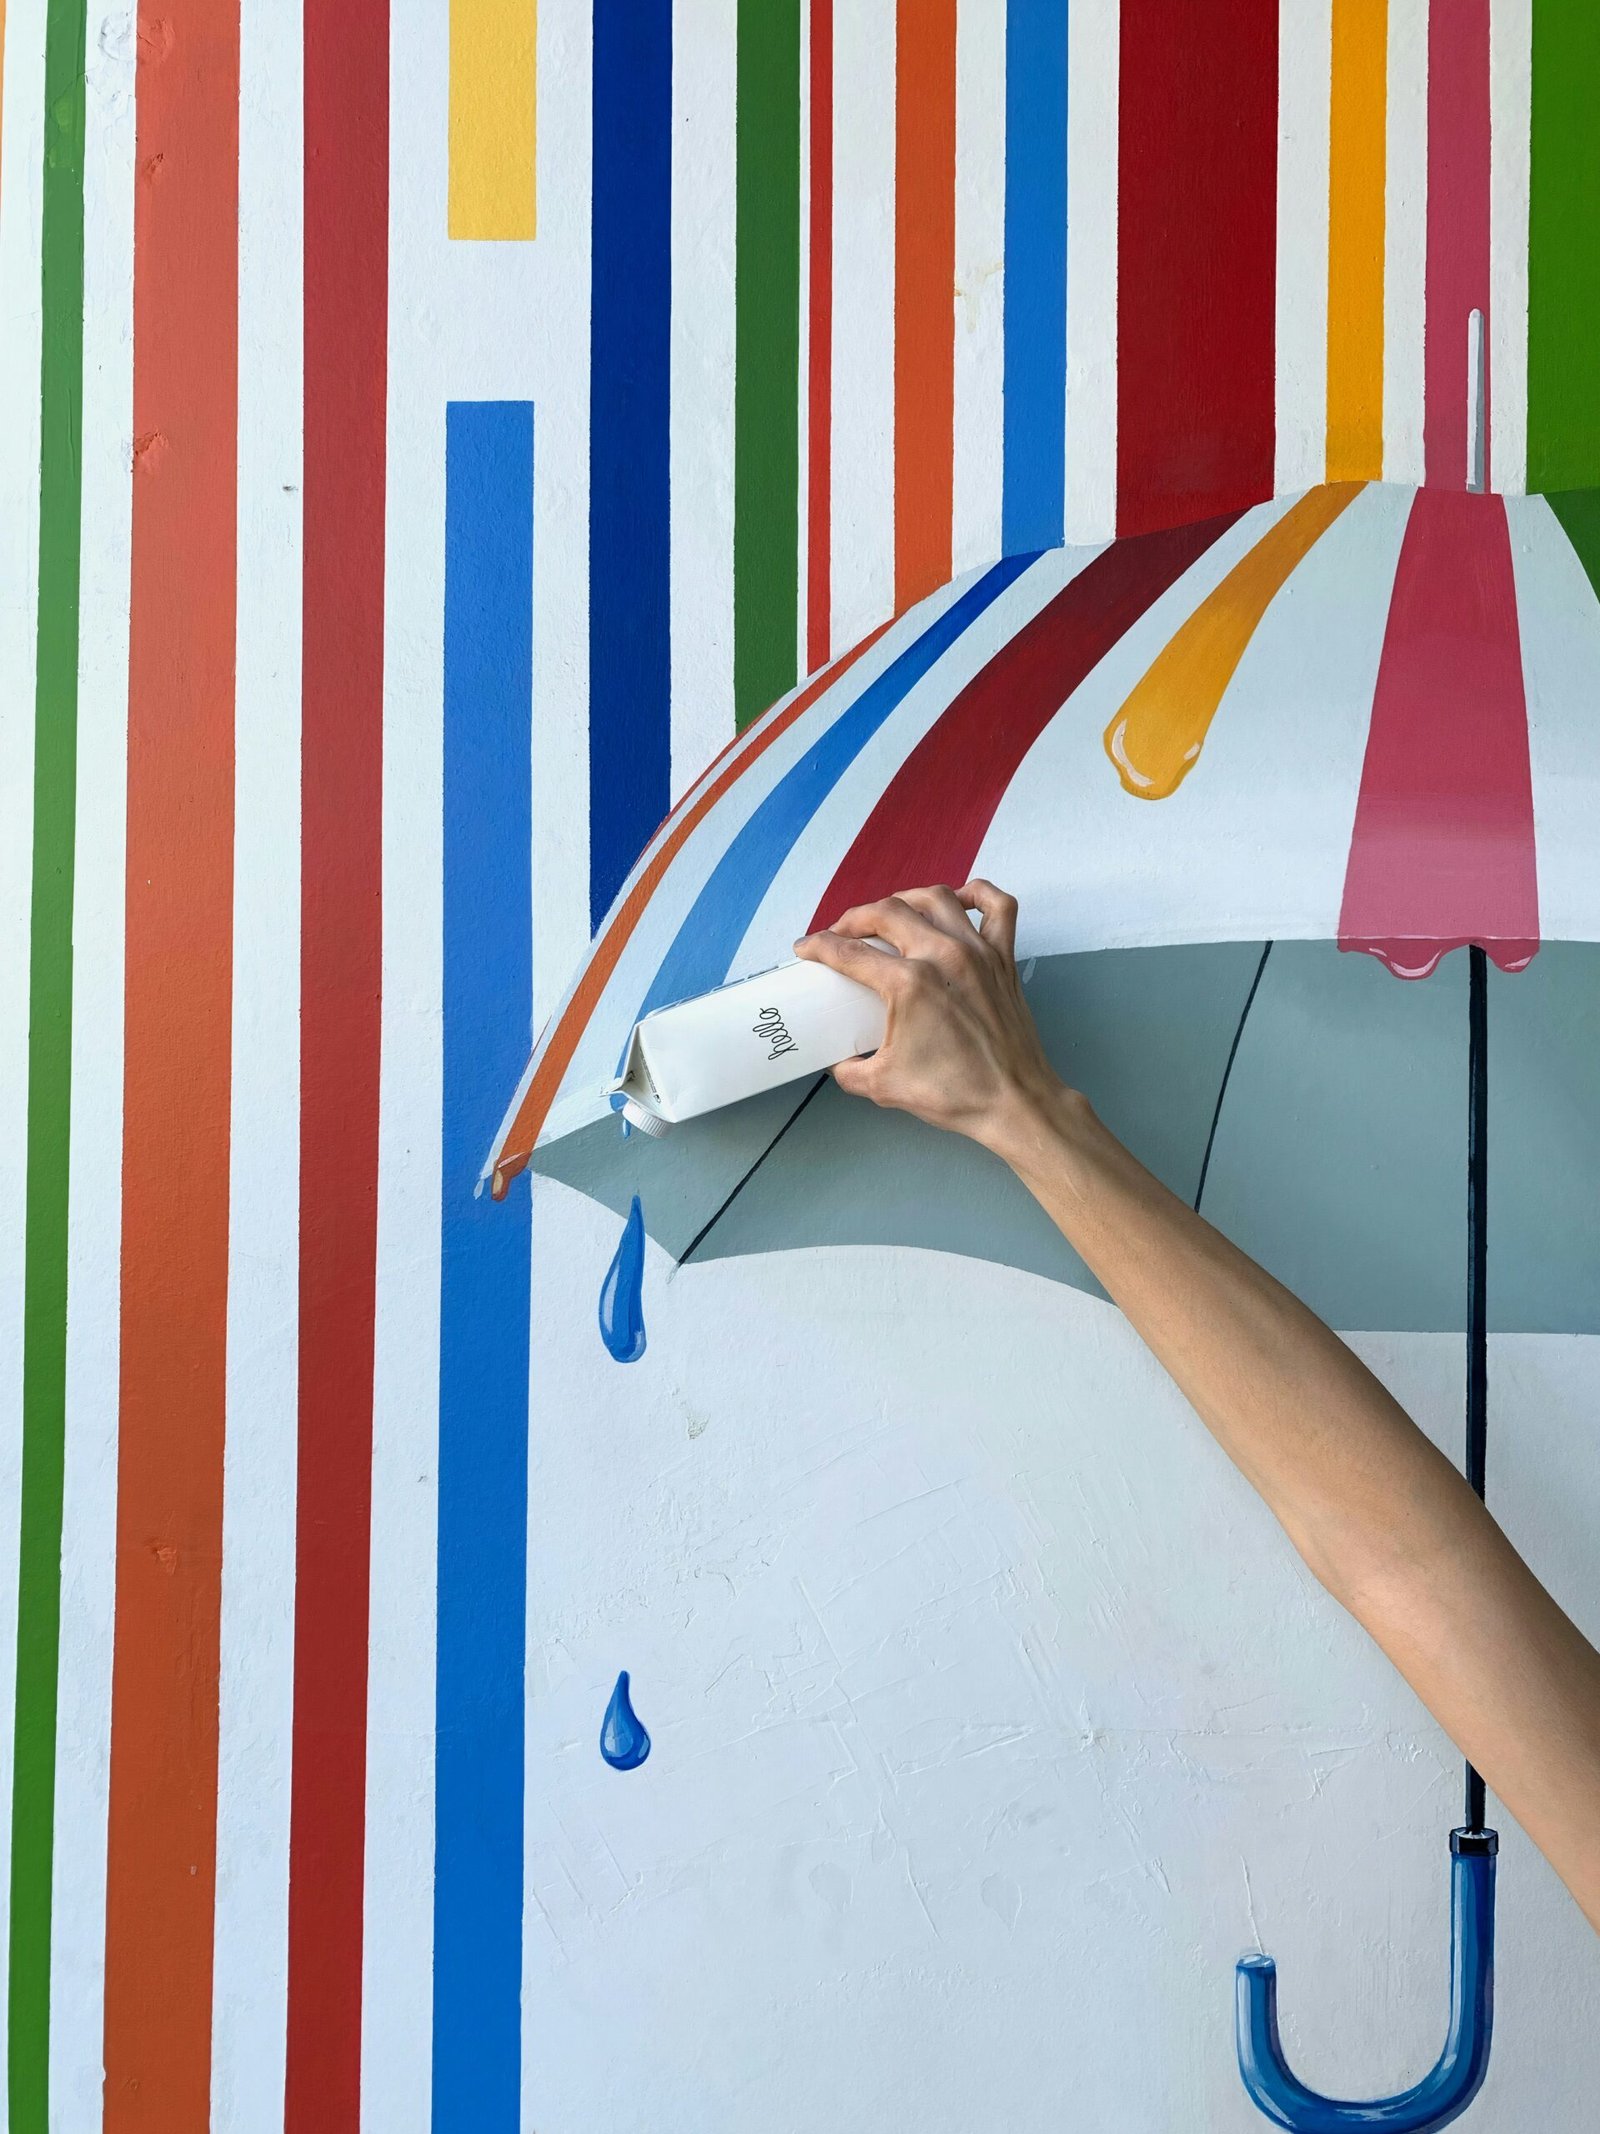 a person holding an umbrella in front of a colorful wall